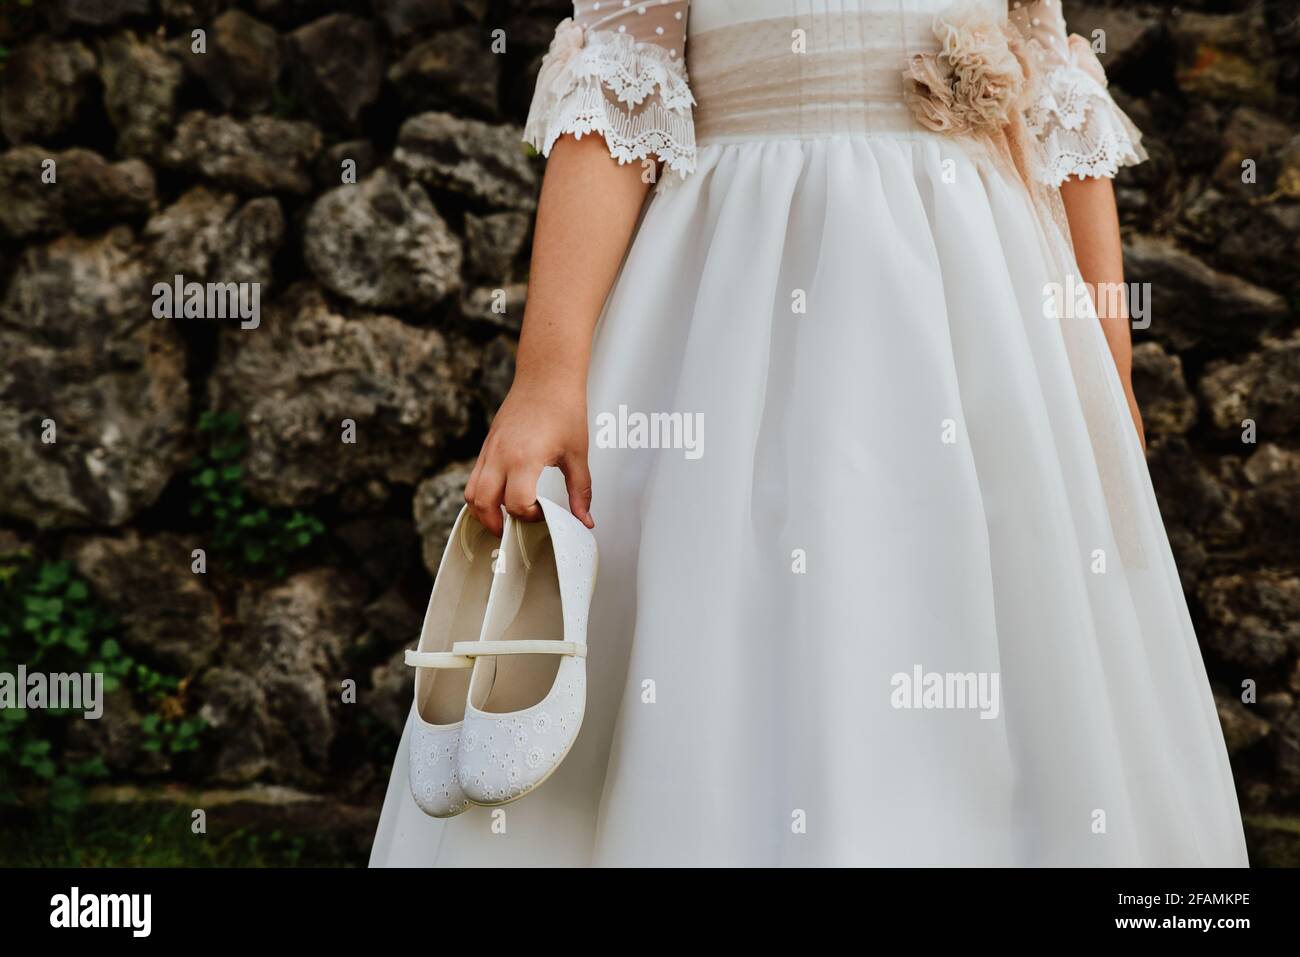 Communion fille avec robe blanche tenant des chaussures blanches Photo  Stock - Alamy